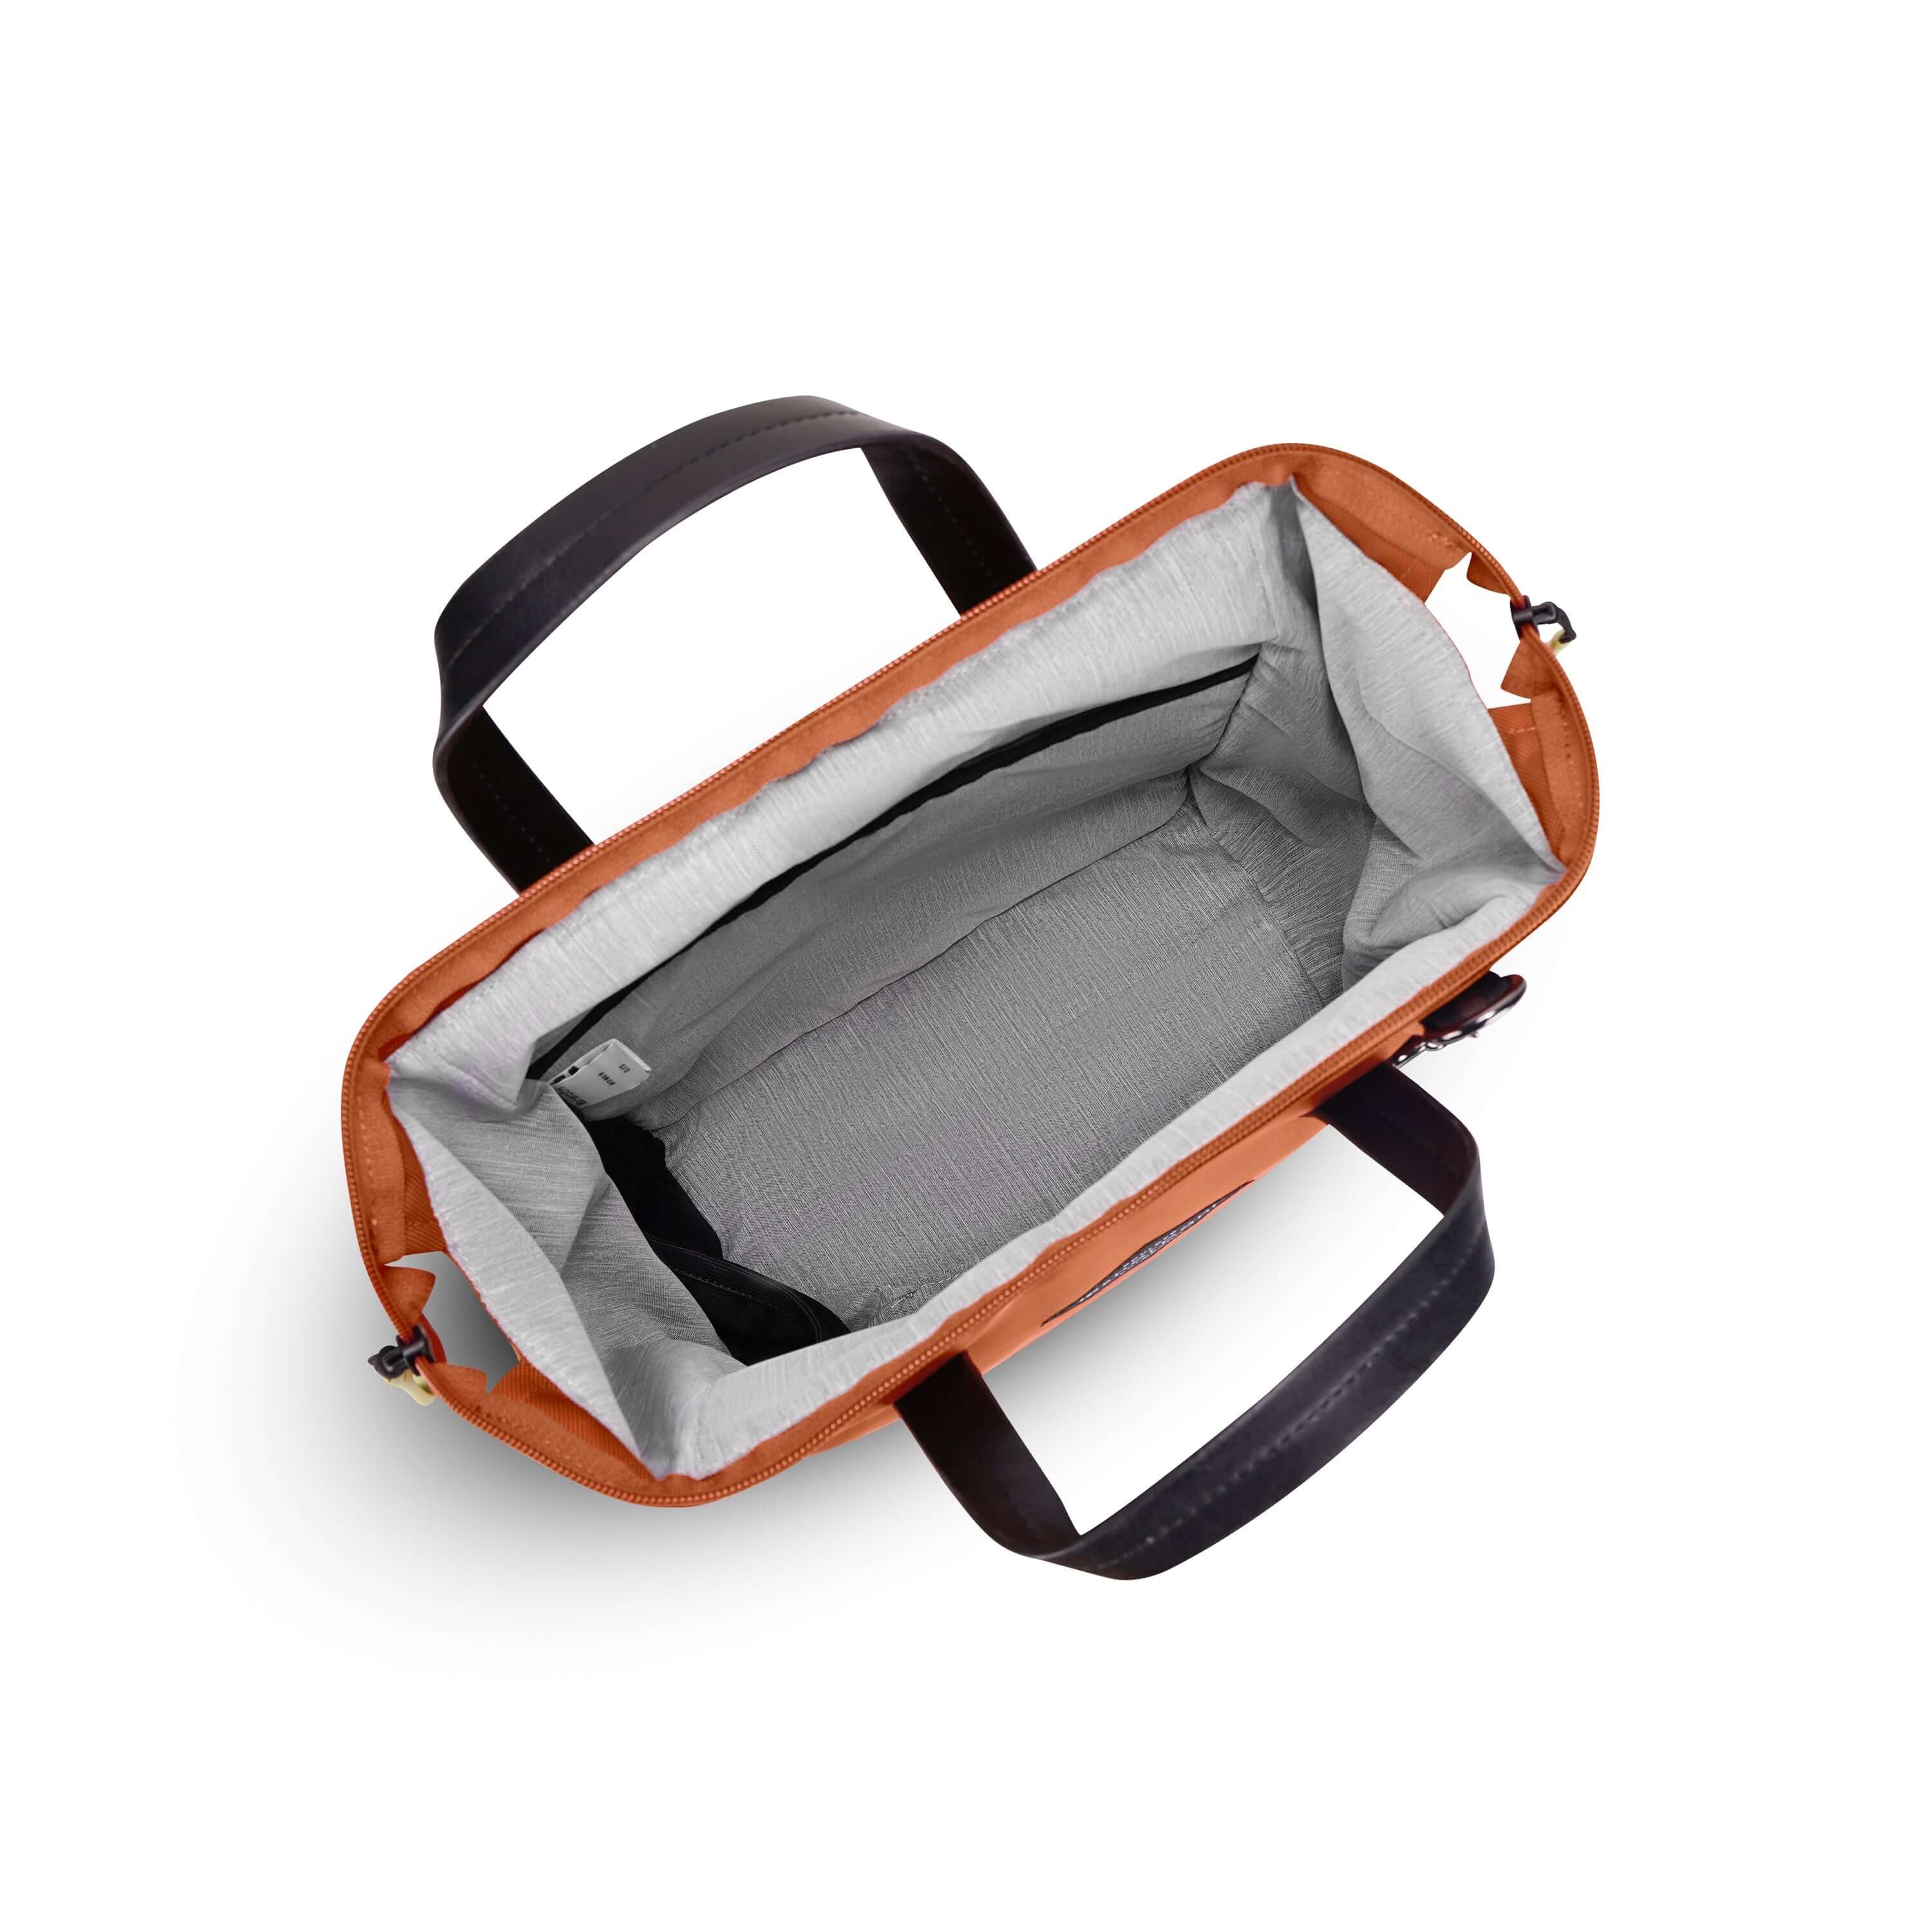 Top view of Sherpani three-in-one bag, the Dispatch in Clay. The main zipper compartment is open to reveal a doctor bag style opening with a rectangular metal frame. The inside of the bag is light gray and features an internal pouch and water bottle holder. 